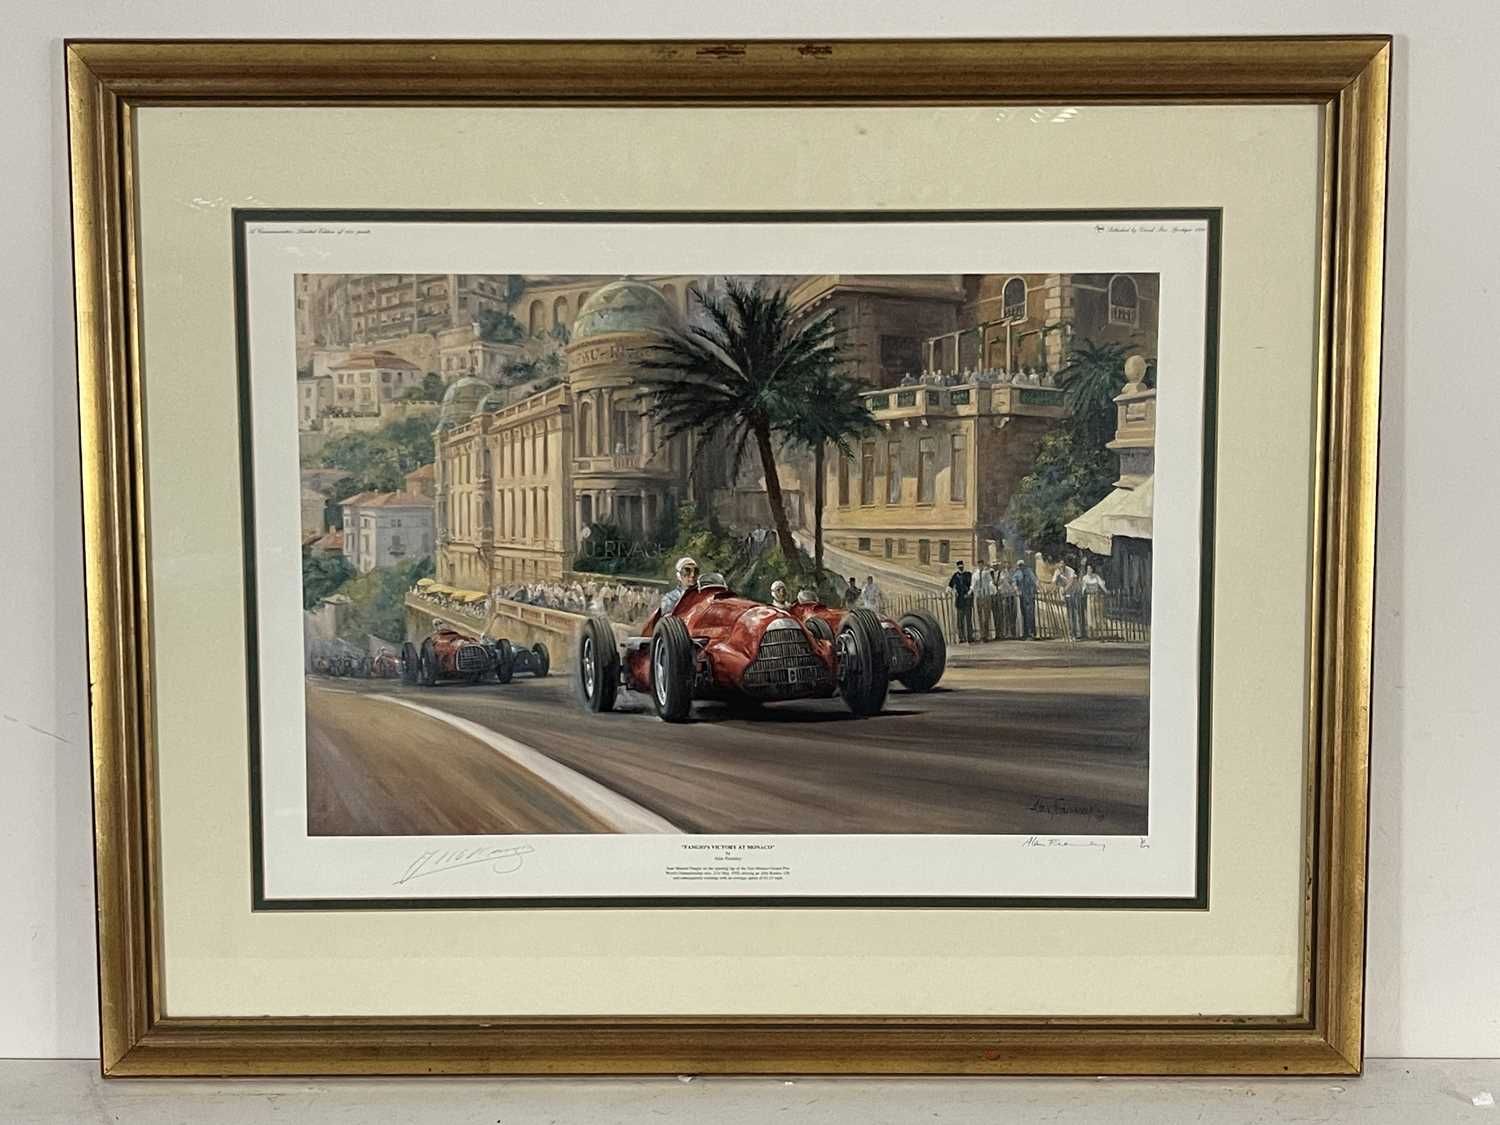 Alan Fearnley (Brtiish, 1942), 'Fangio's Victory at Monaco', signed l.r., signed by Fangio l.l., - Image 2 of 4